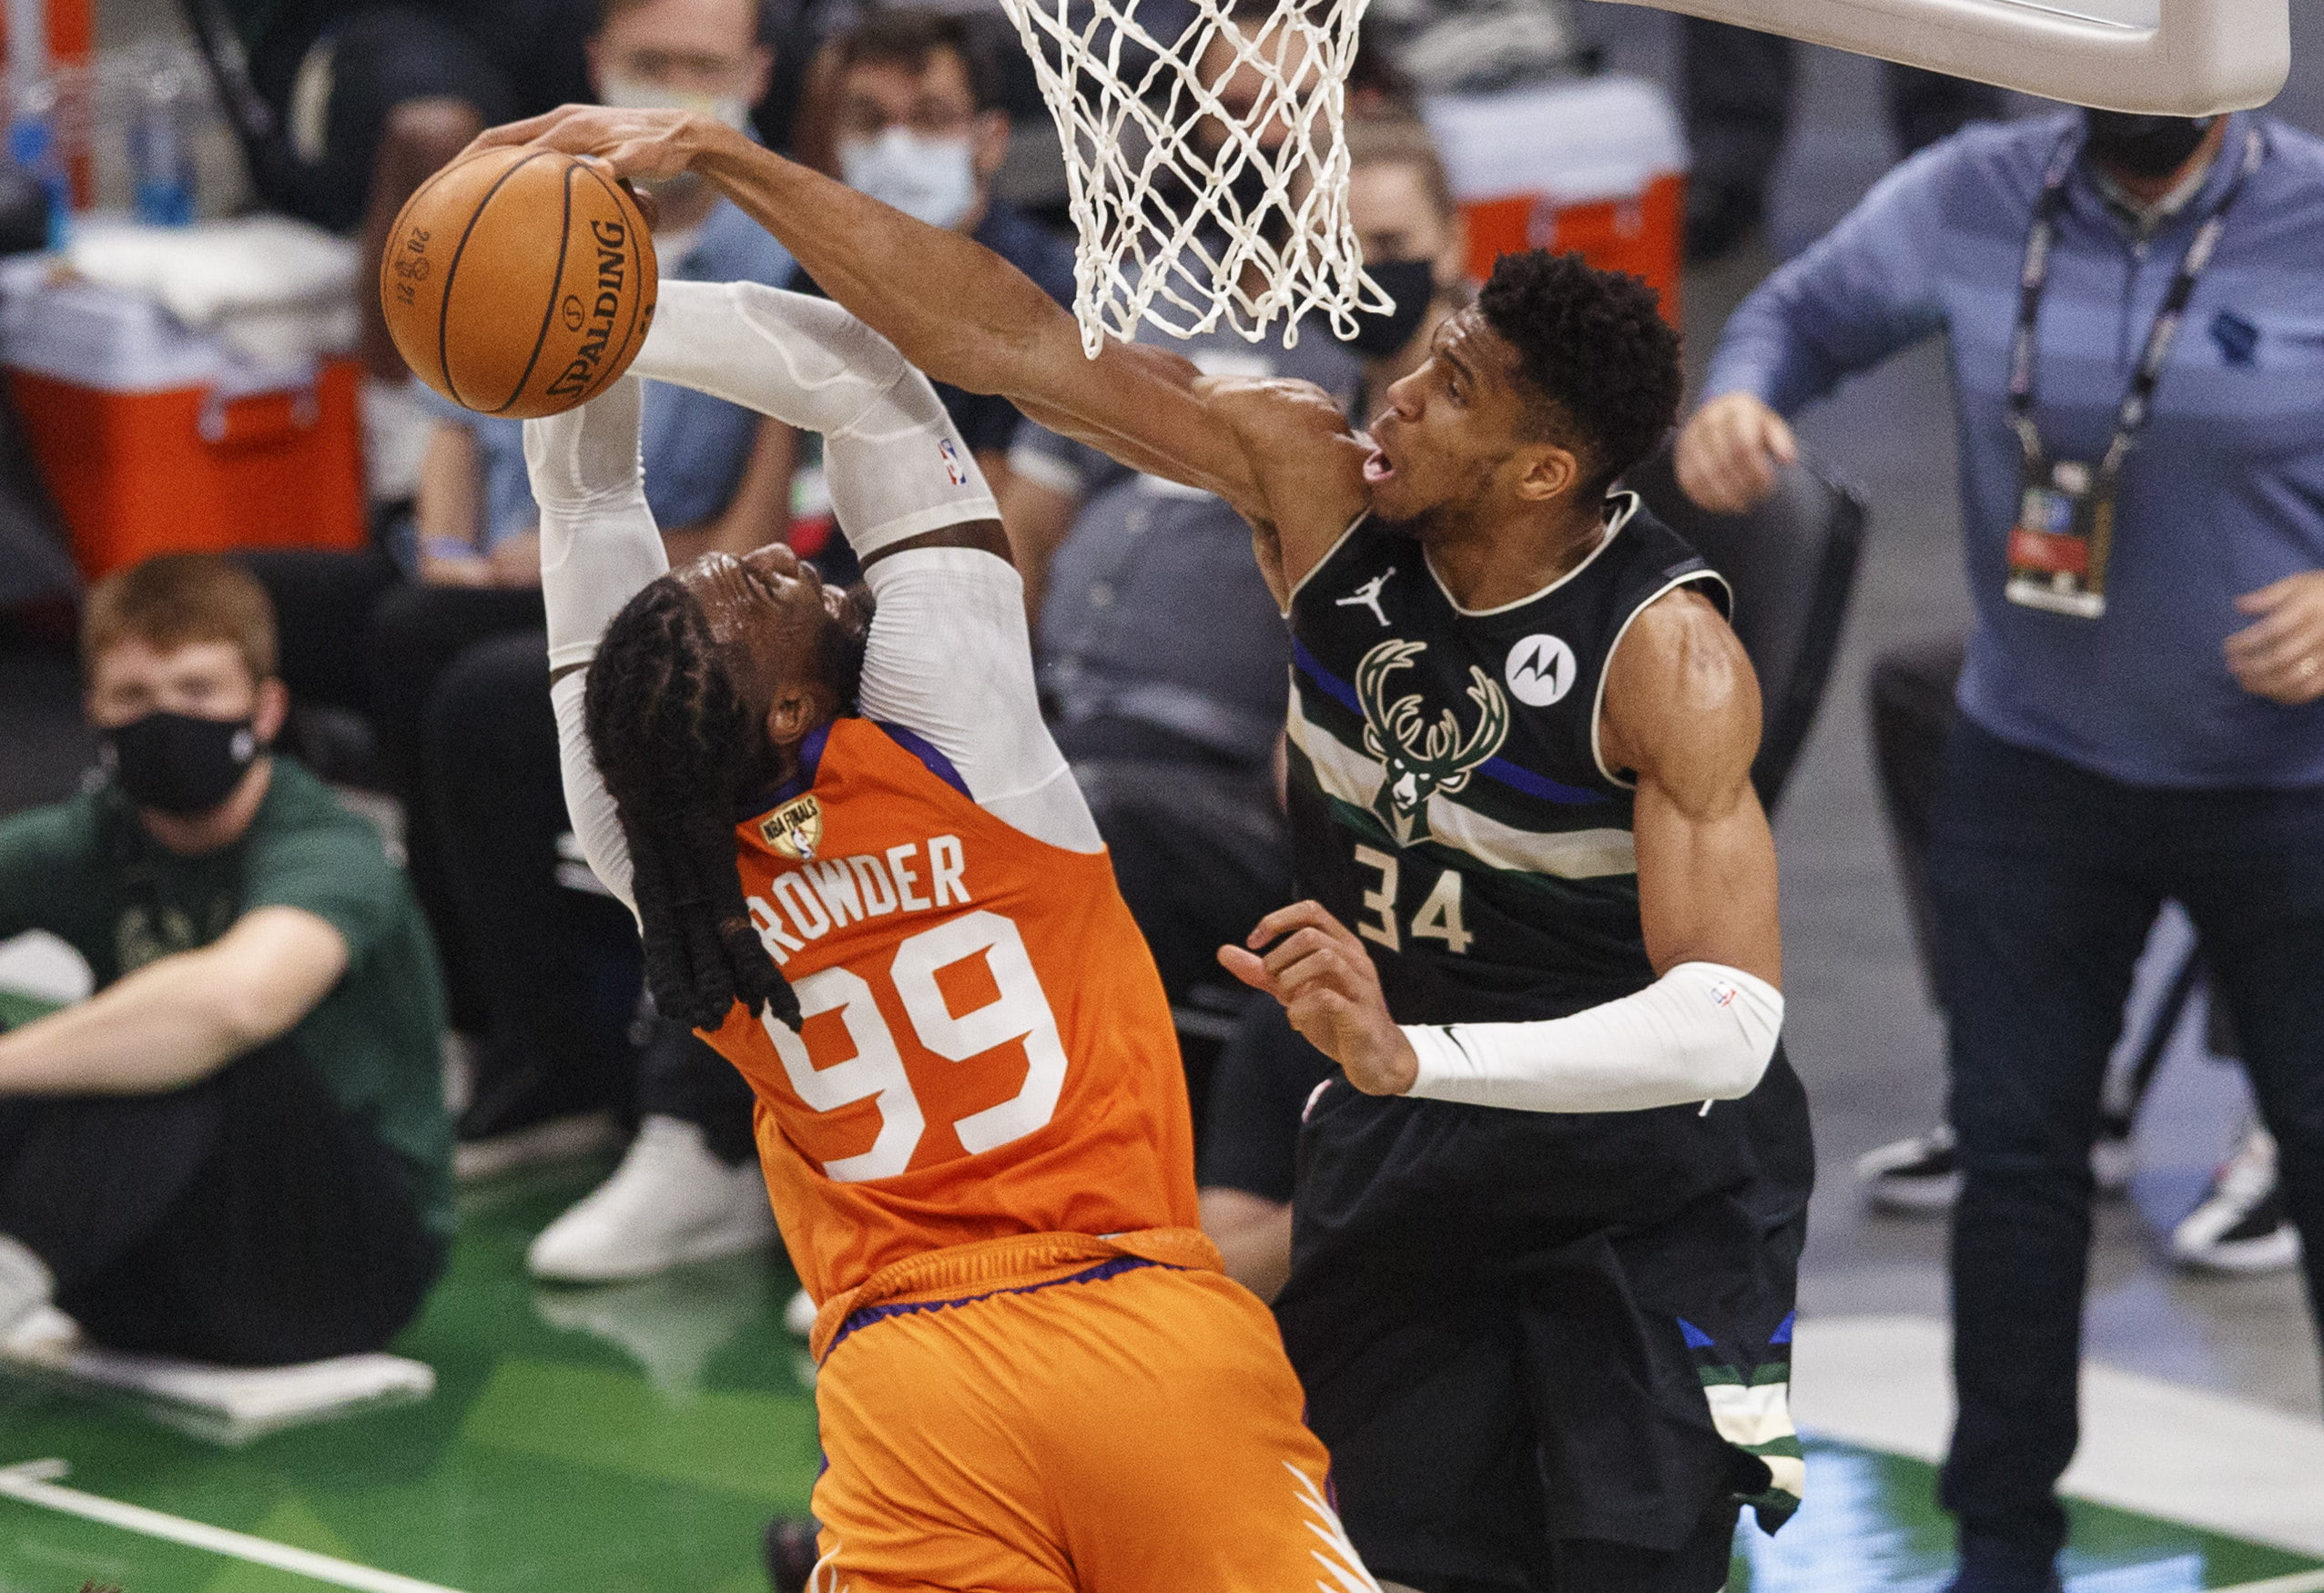 NBA Finals 2021: NBA champion Giannis Antetokounmpo has entered realm of  all-time greatness